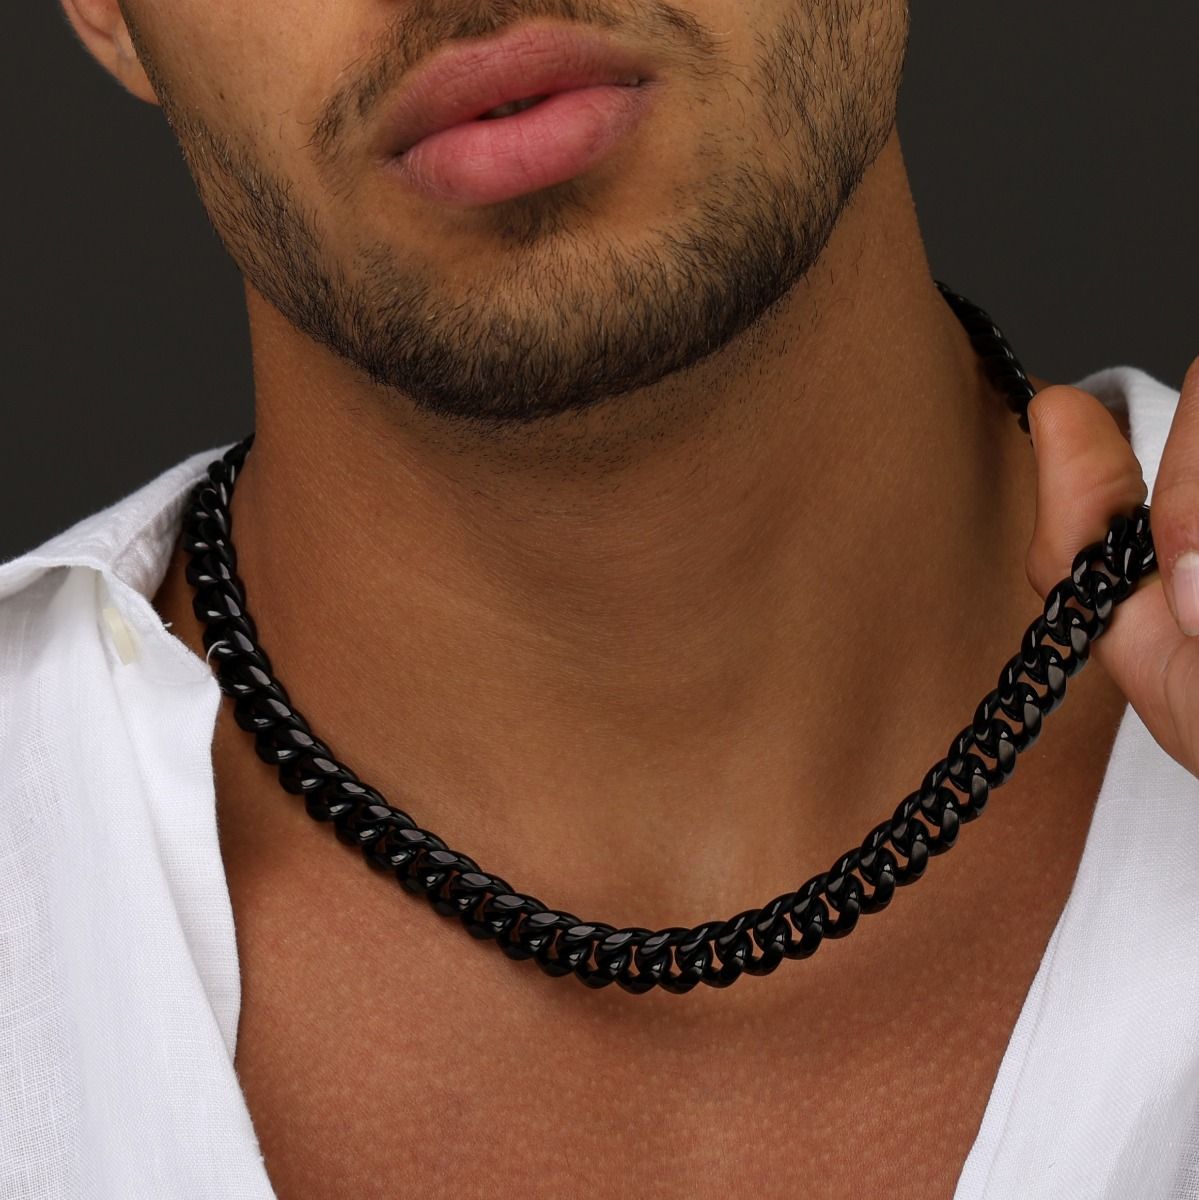 FOXR Lether Base Metal Chain With Pendant for Men & Boys (Black) Leather  Chain Price in India - Buy FOXR Lether Base Metal Chain With Pendant for Men  & Boys (Black) Leather